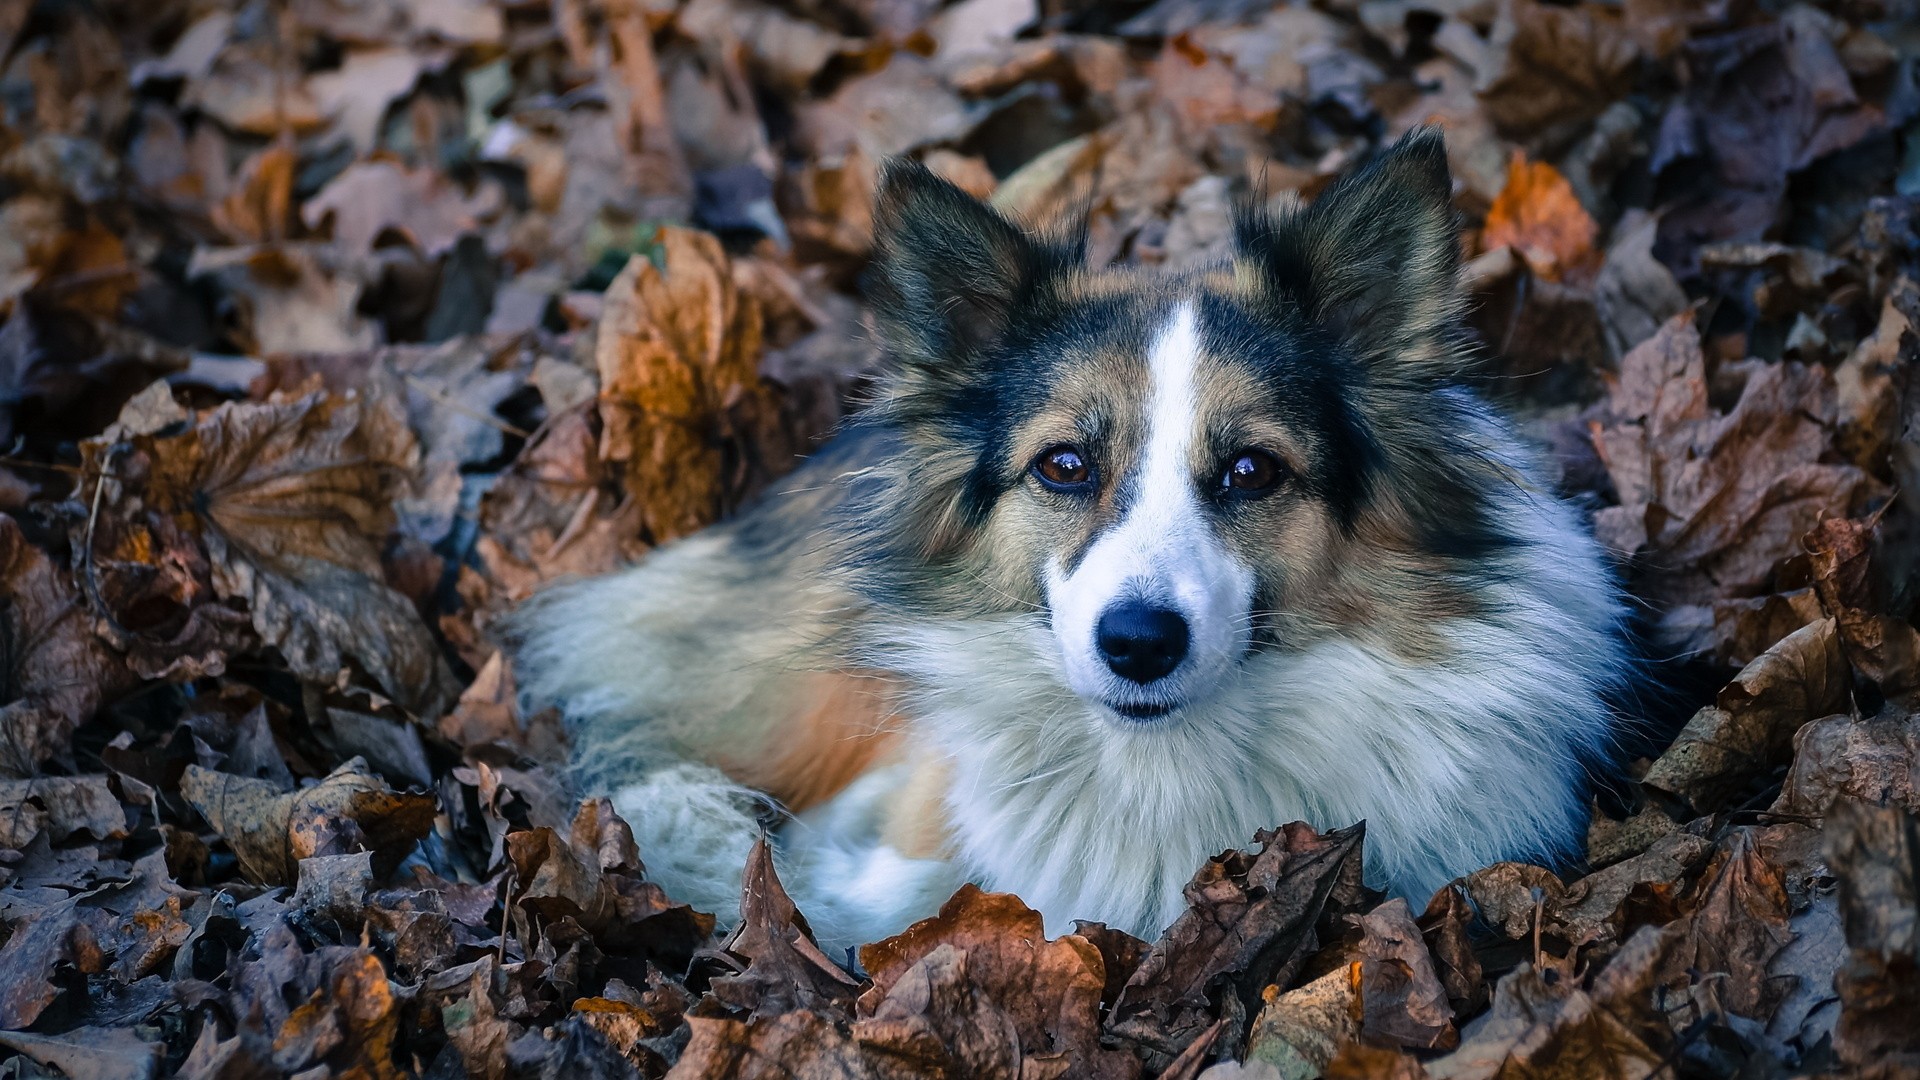 General 1920x1080 animals dog leaves mammals fallen leaves outdoors